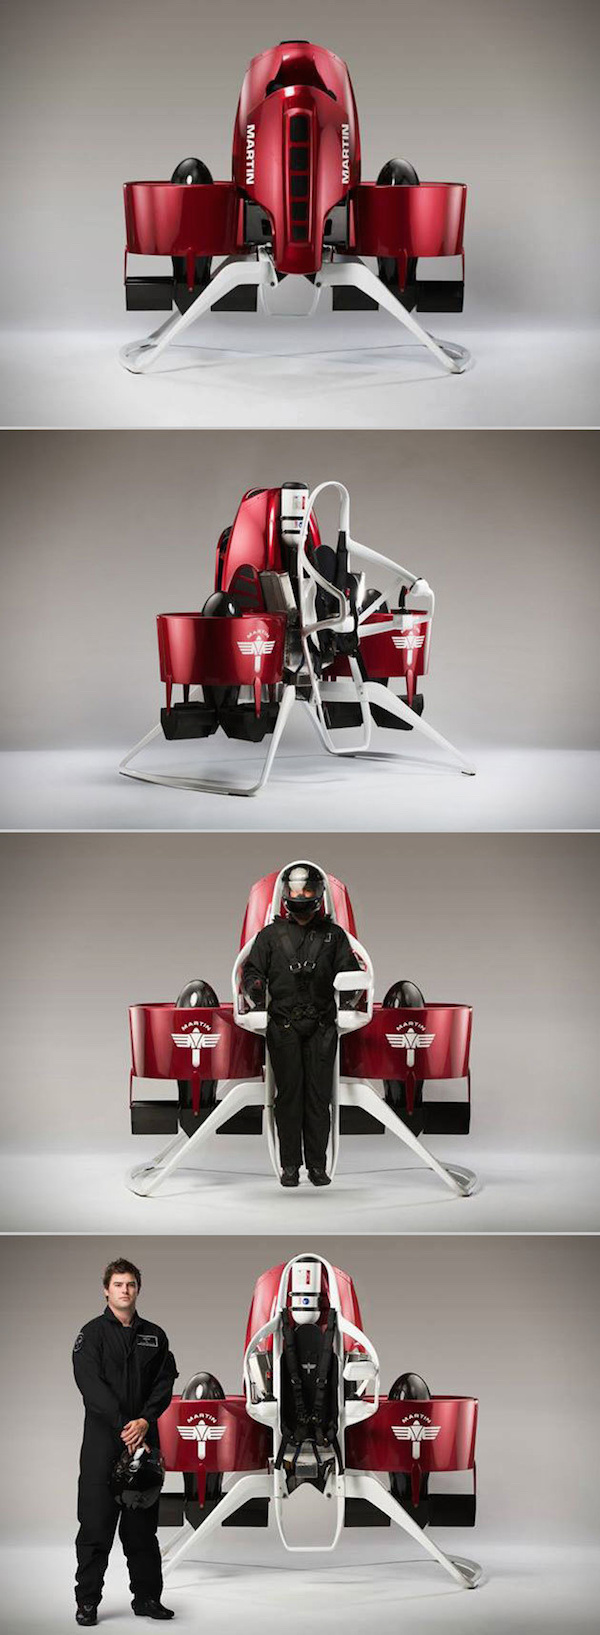 Actual jetpacks are being developed for emergency first responders.